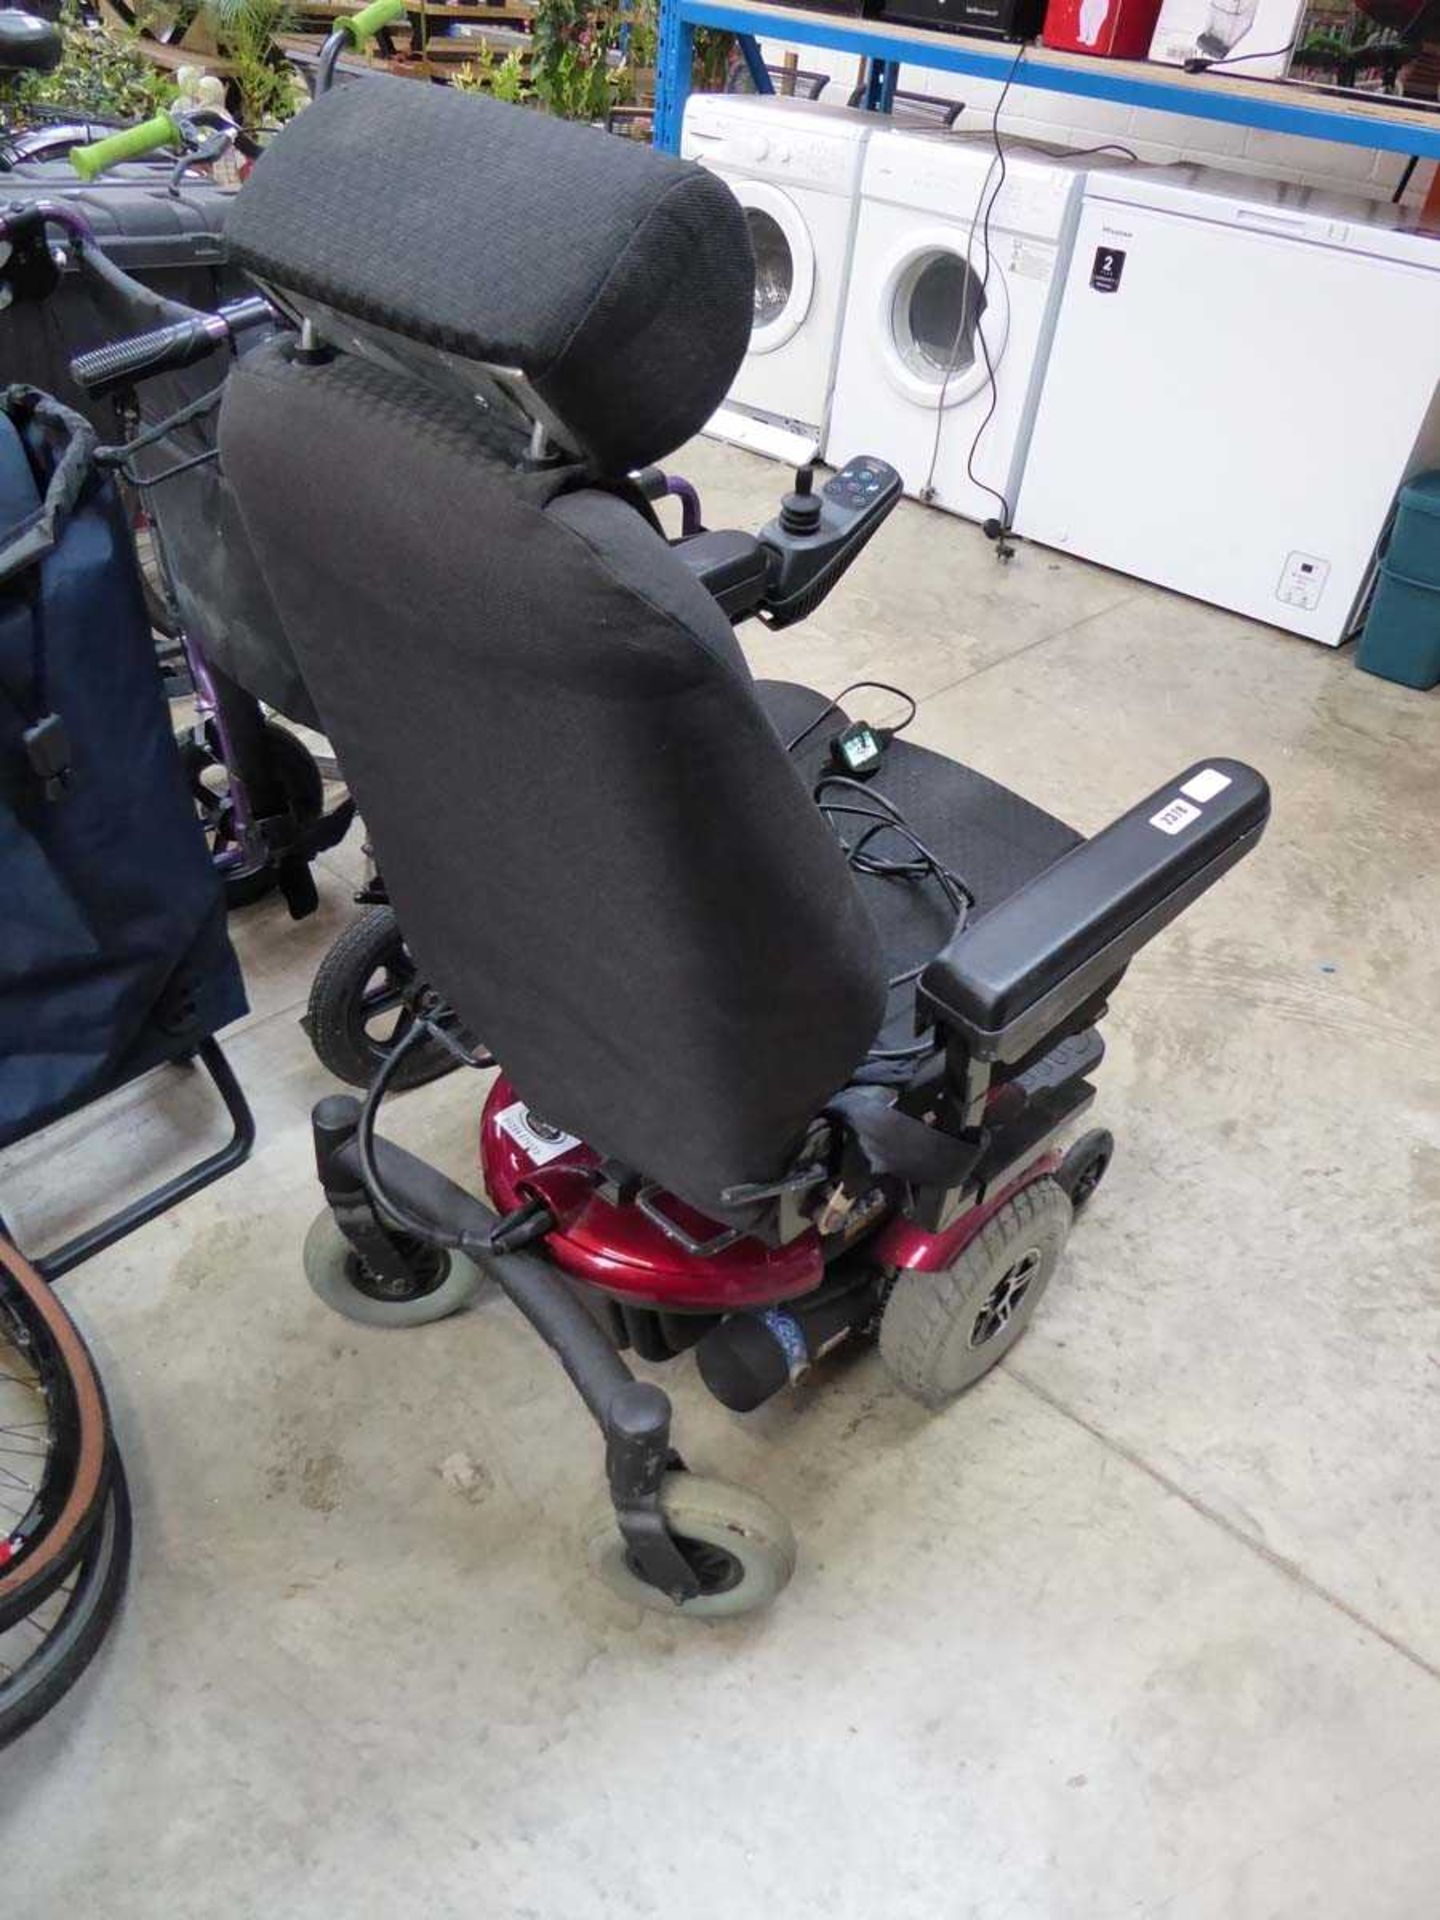 Jet 3 Ultra battery operated disability chair with charger - Bild 2 aus 4